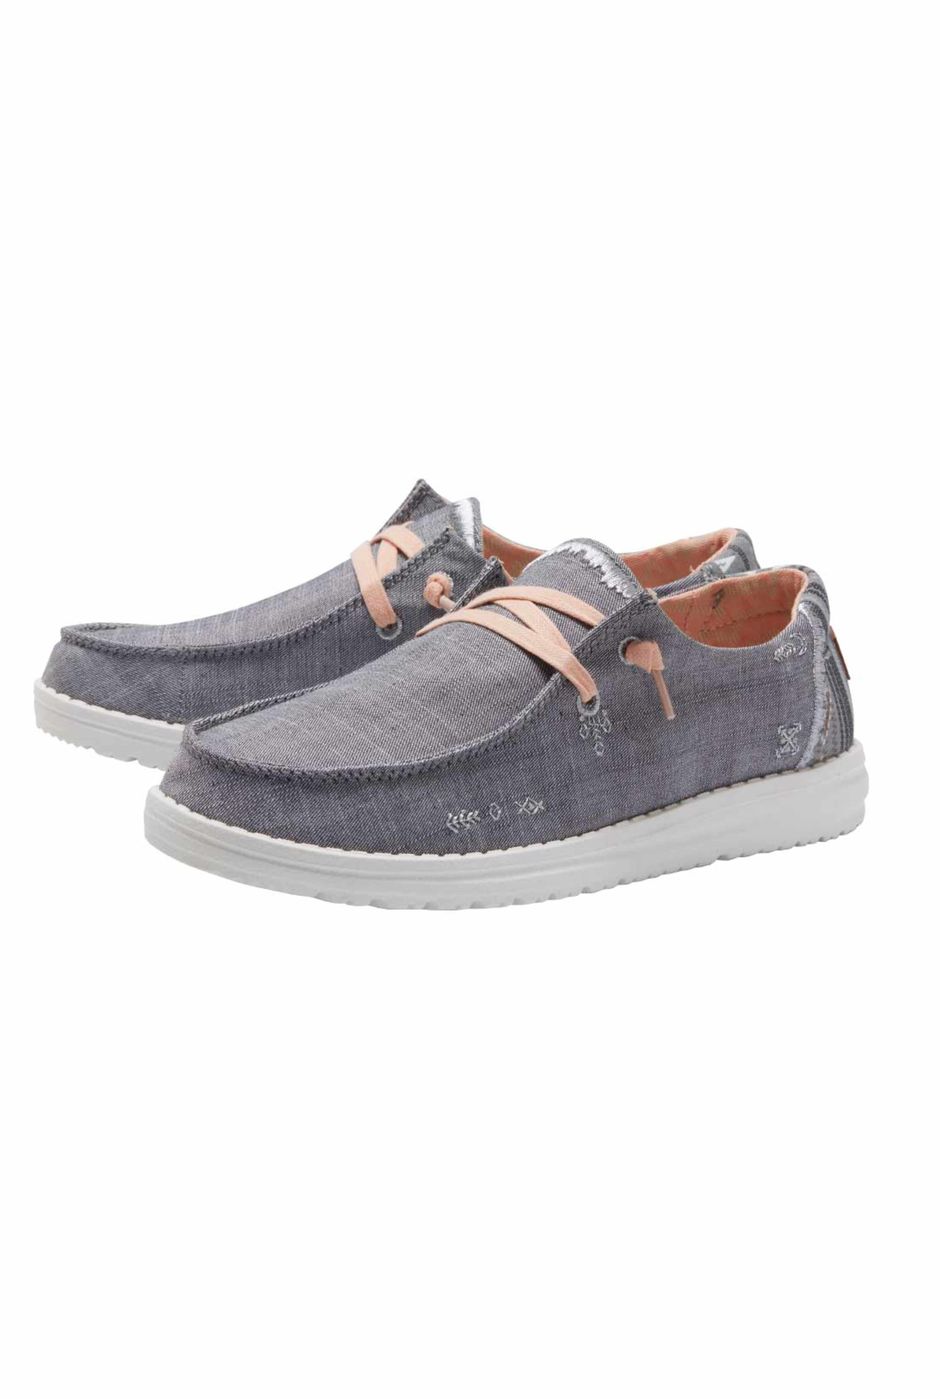 Hey Dude Wendy Boo Lightweight Canvas Shoes Grey